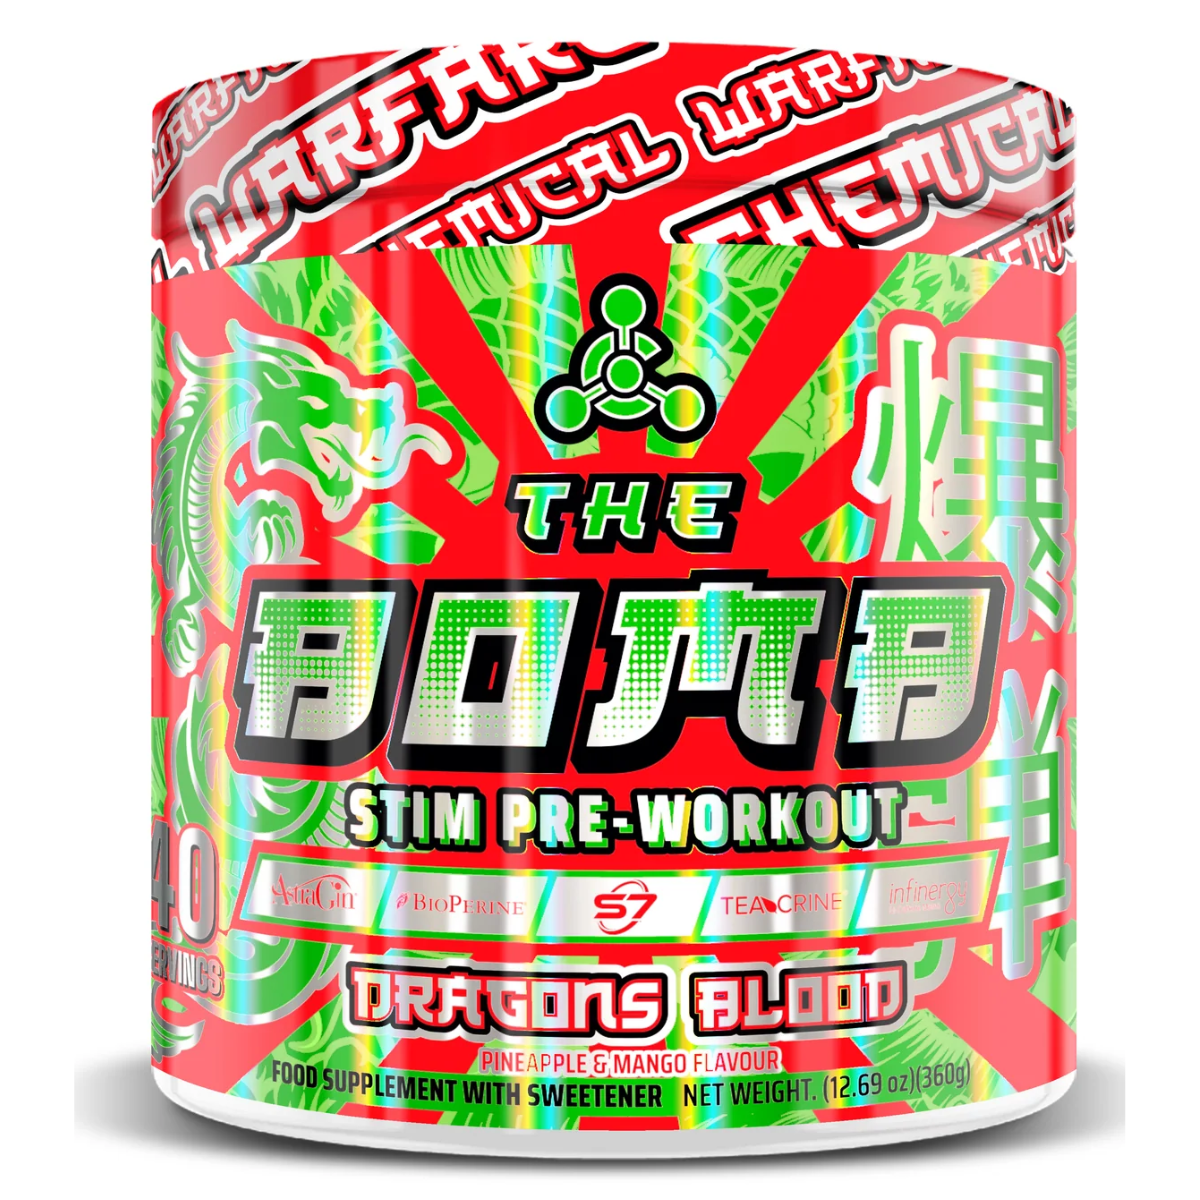 CW THE BOMB™ PRE-WORKOUT - 2